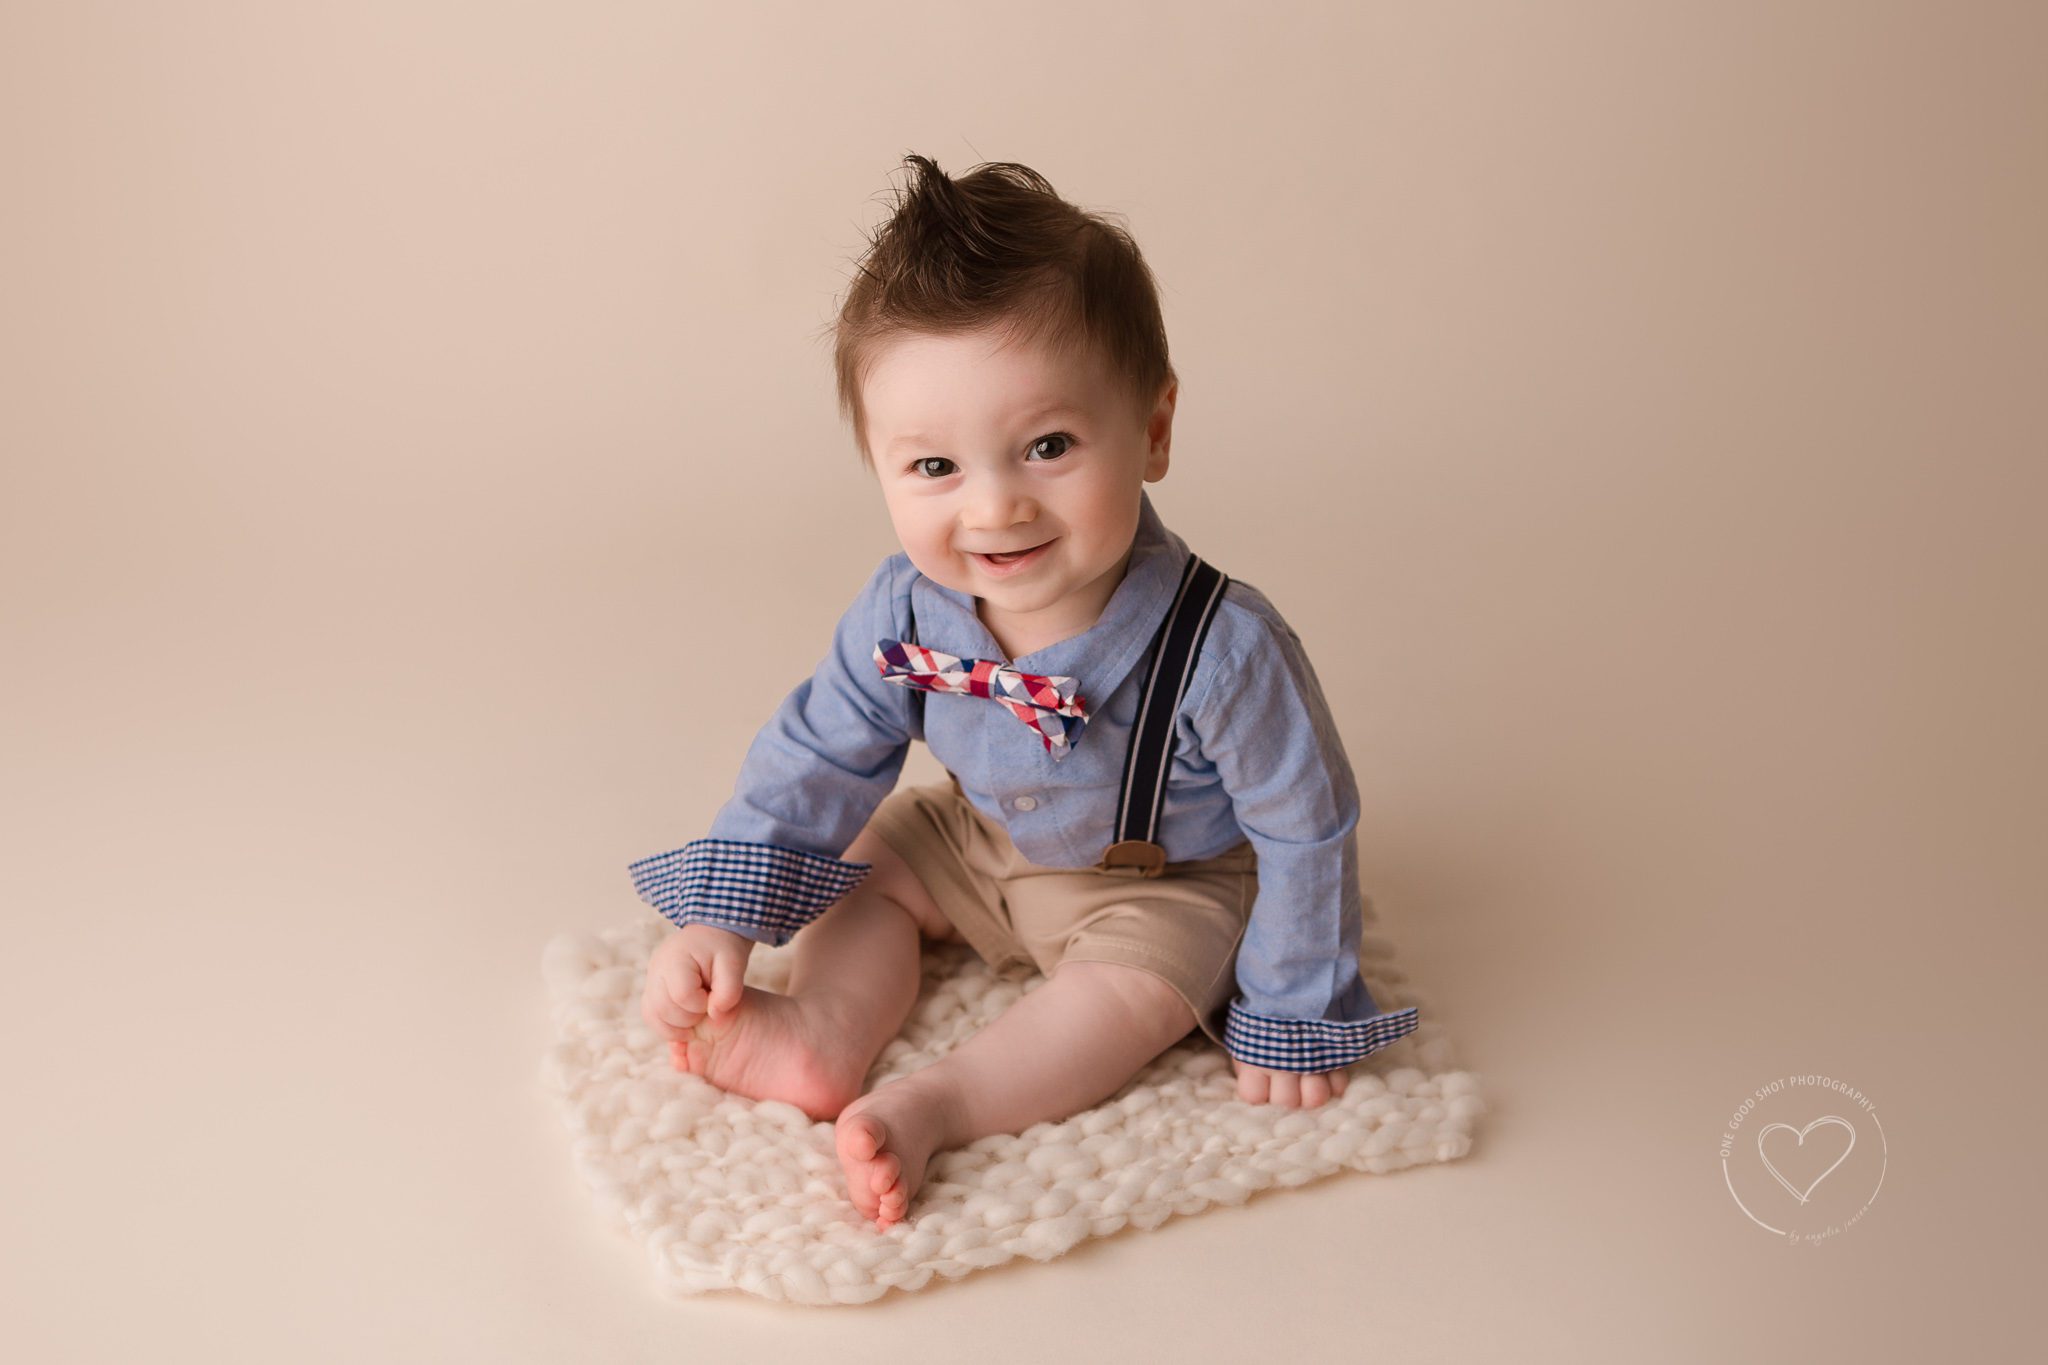 Fresno Baby Photographer, 6 month, boy, sitting, suspenders and bow tie, smiling